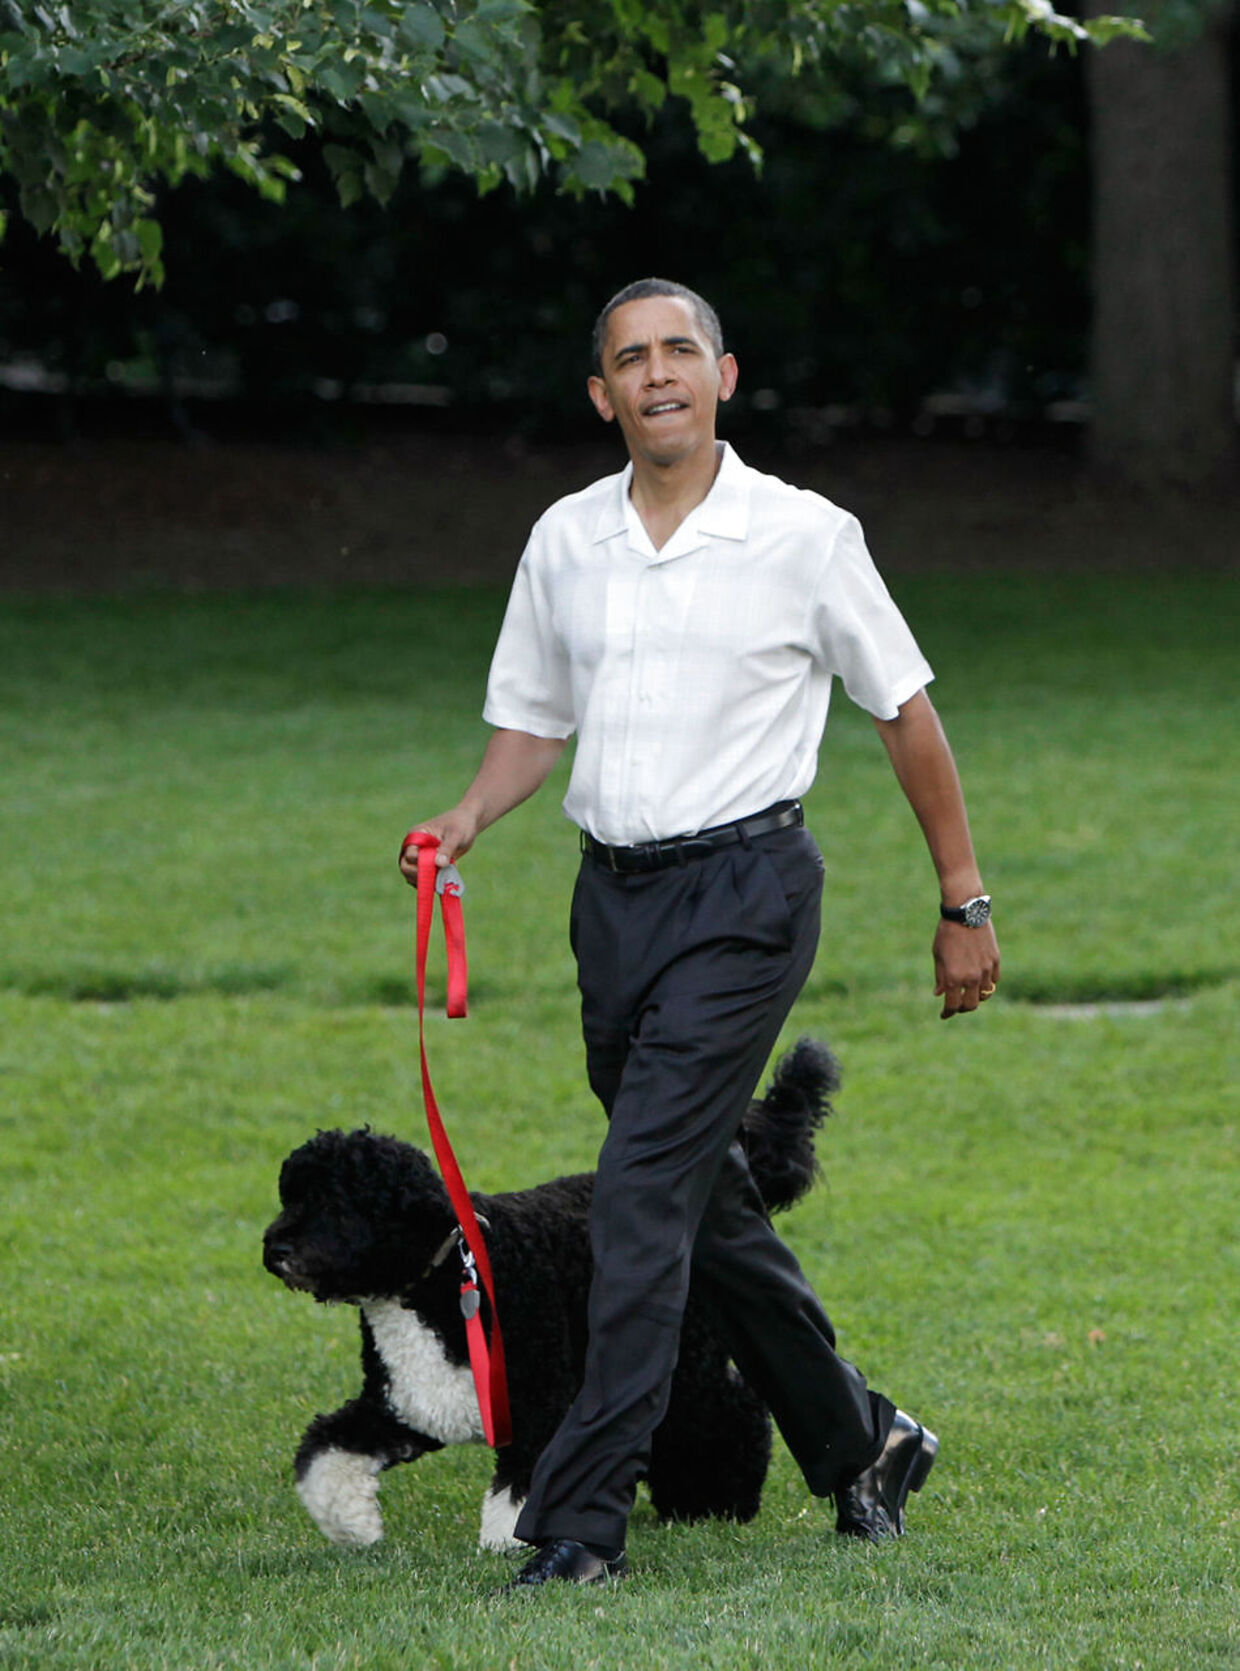 US President Barack Obama walks the first family's dog as he arrives at the Congressional Picnic on the South Lawn of the White House in Washington, DC June 8, 2010. AFP PHOTO / YURI GRIPAS